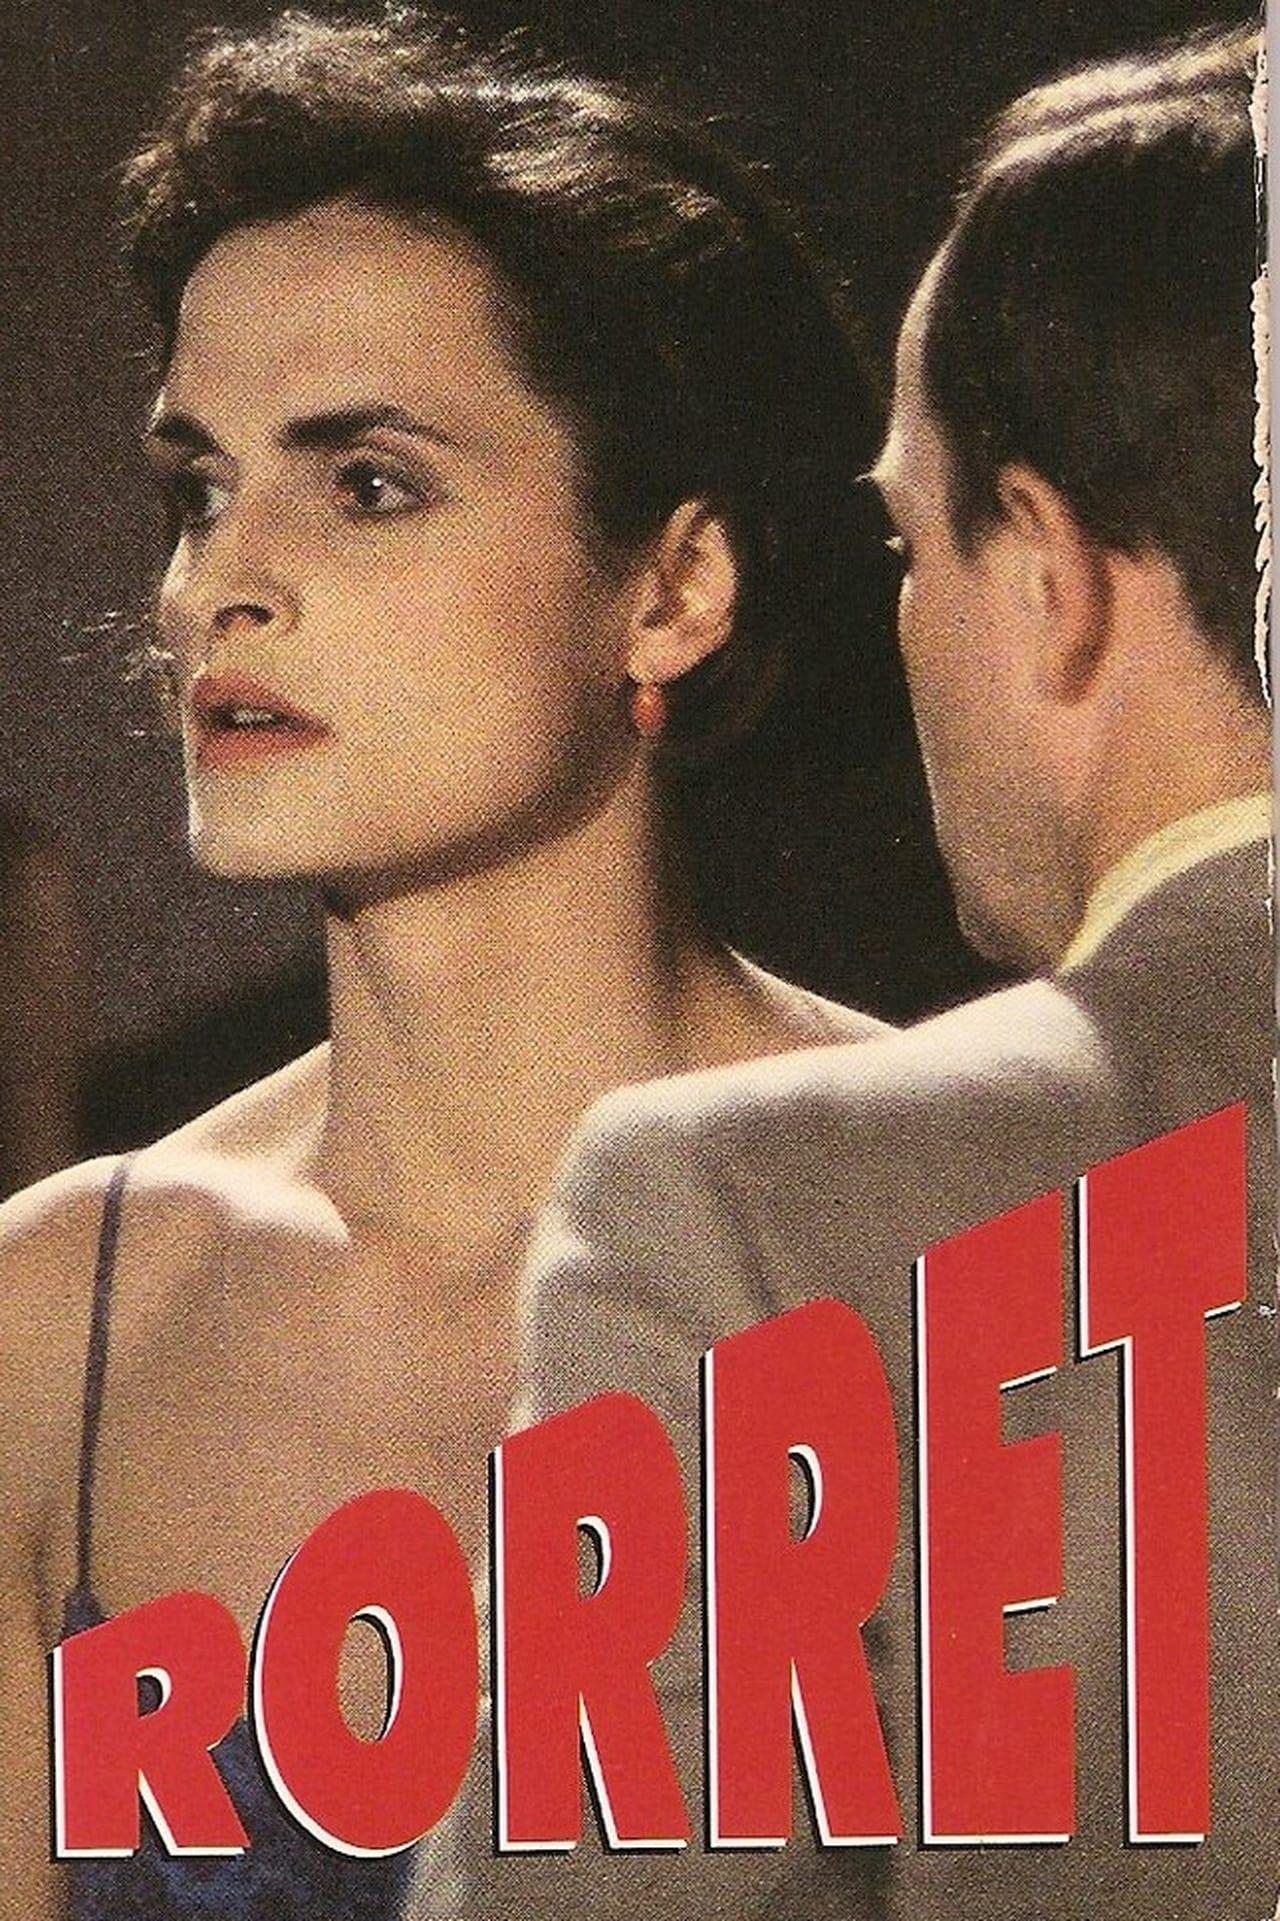 Rorret poster